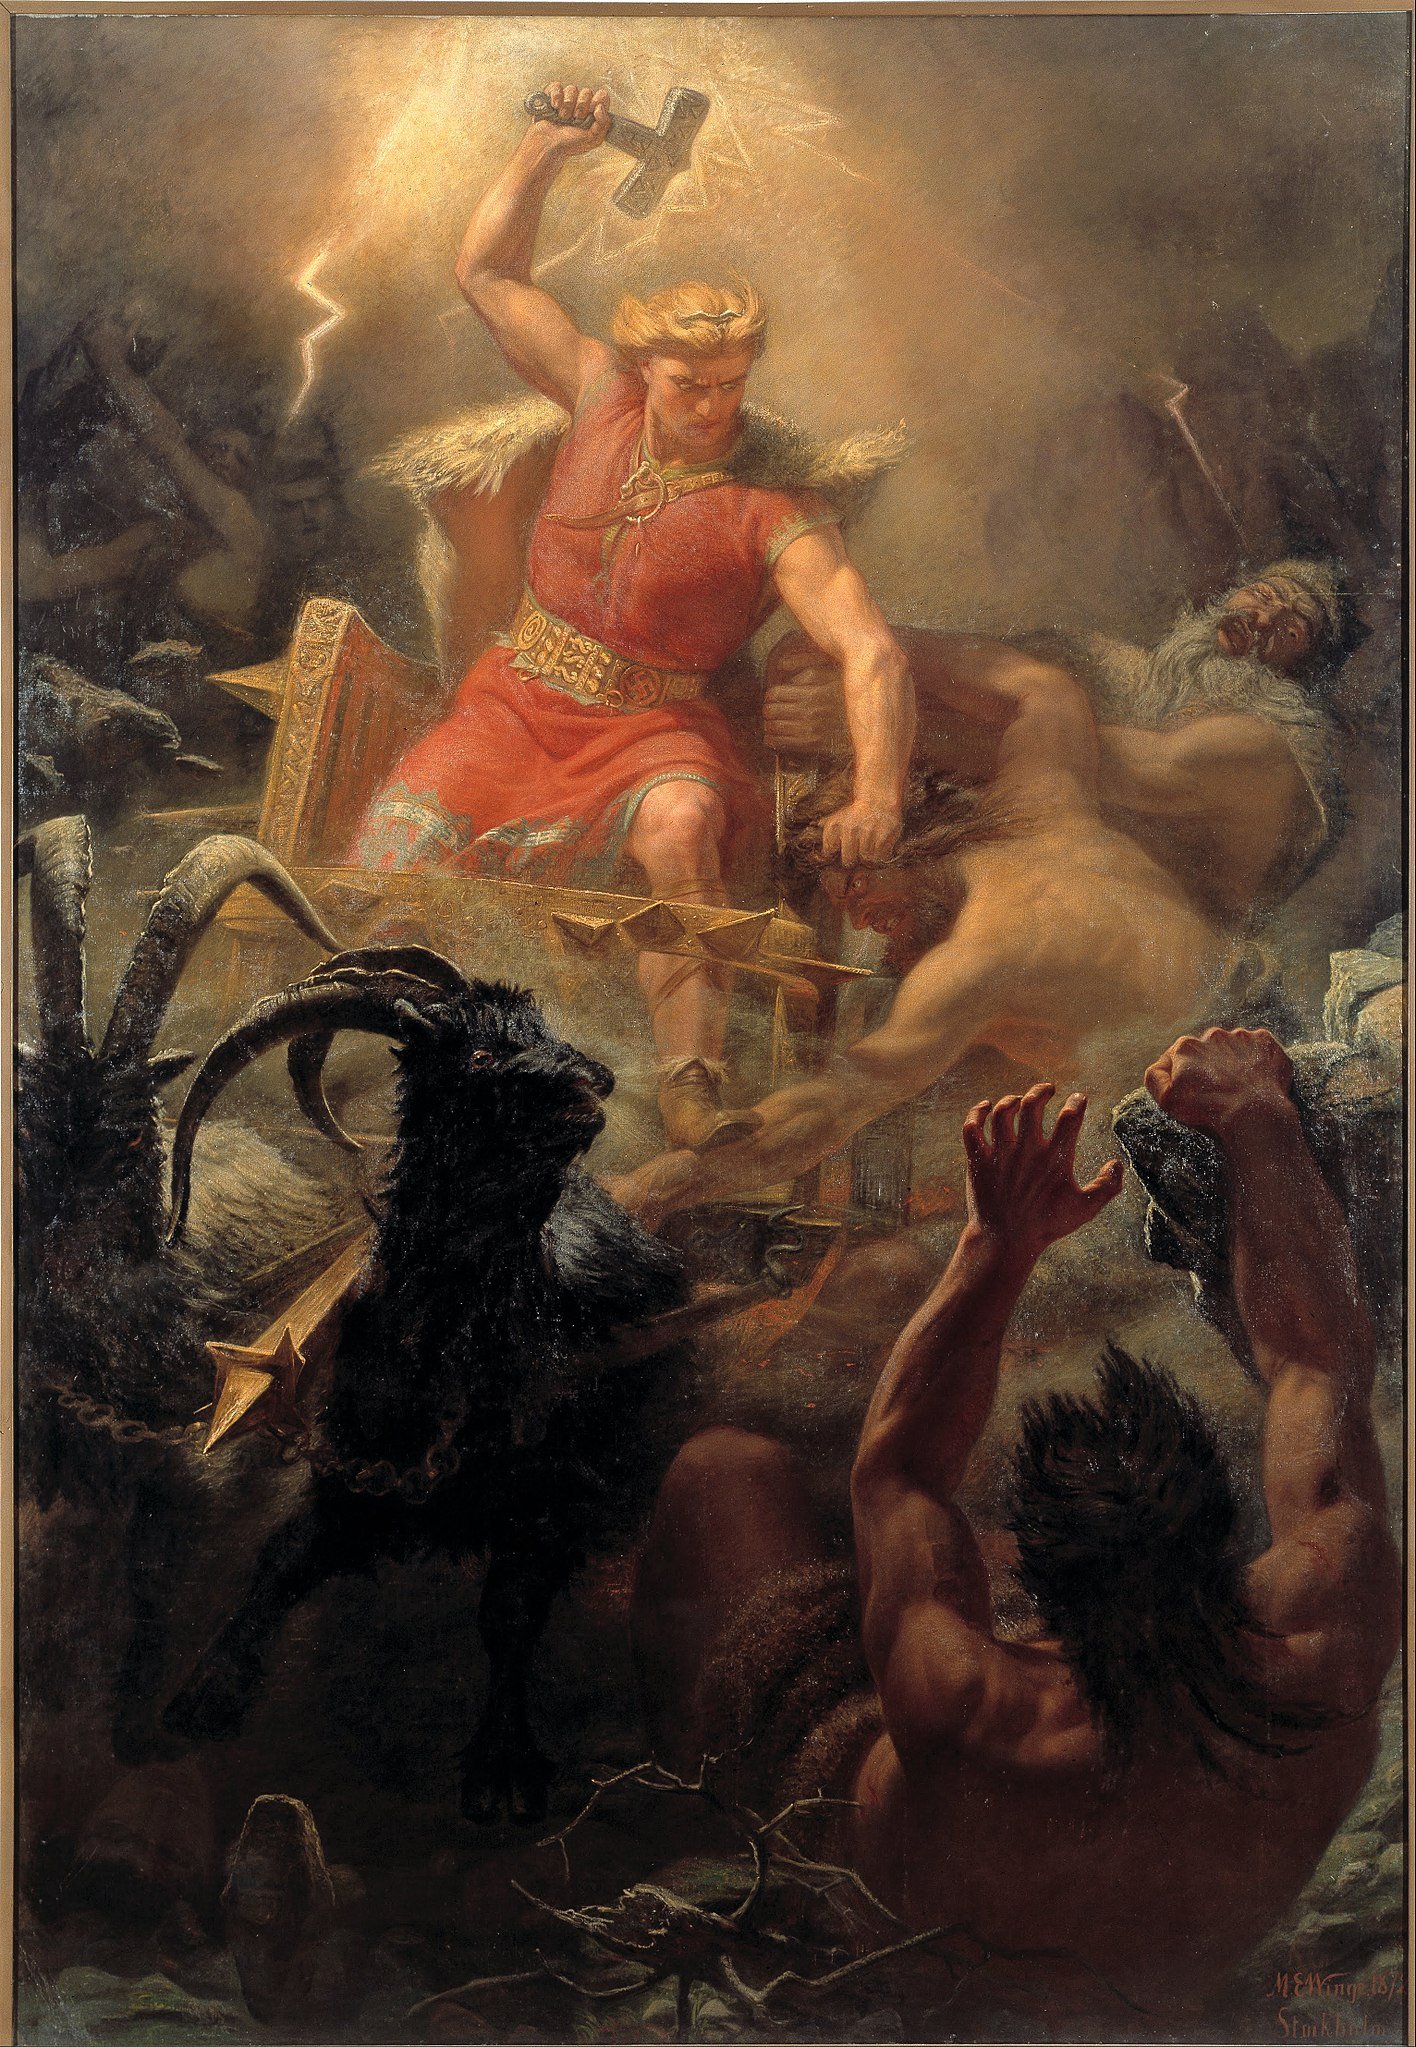 A painting of Thor swinging his hammer and fighting Giants. The hammer has lighting coming out of it.